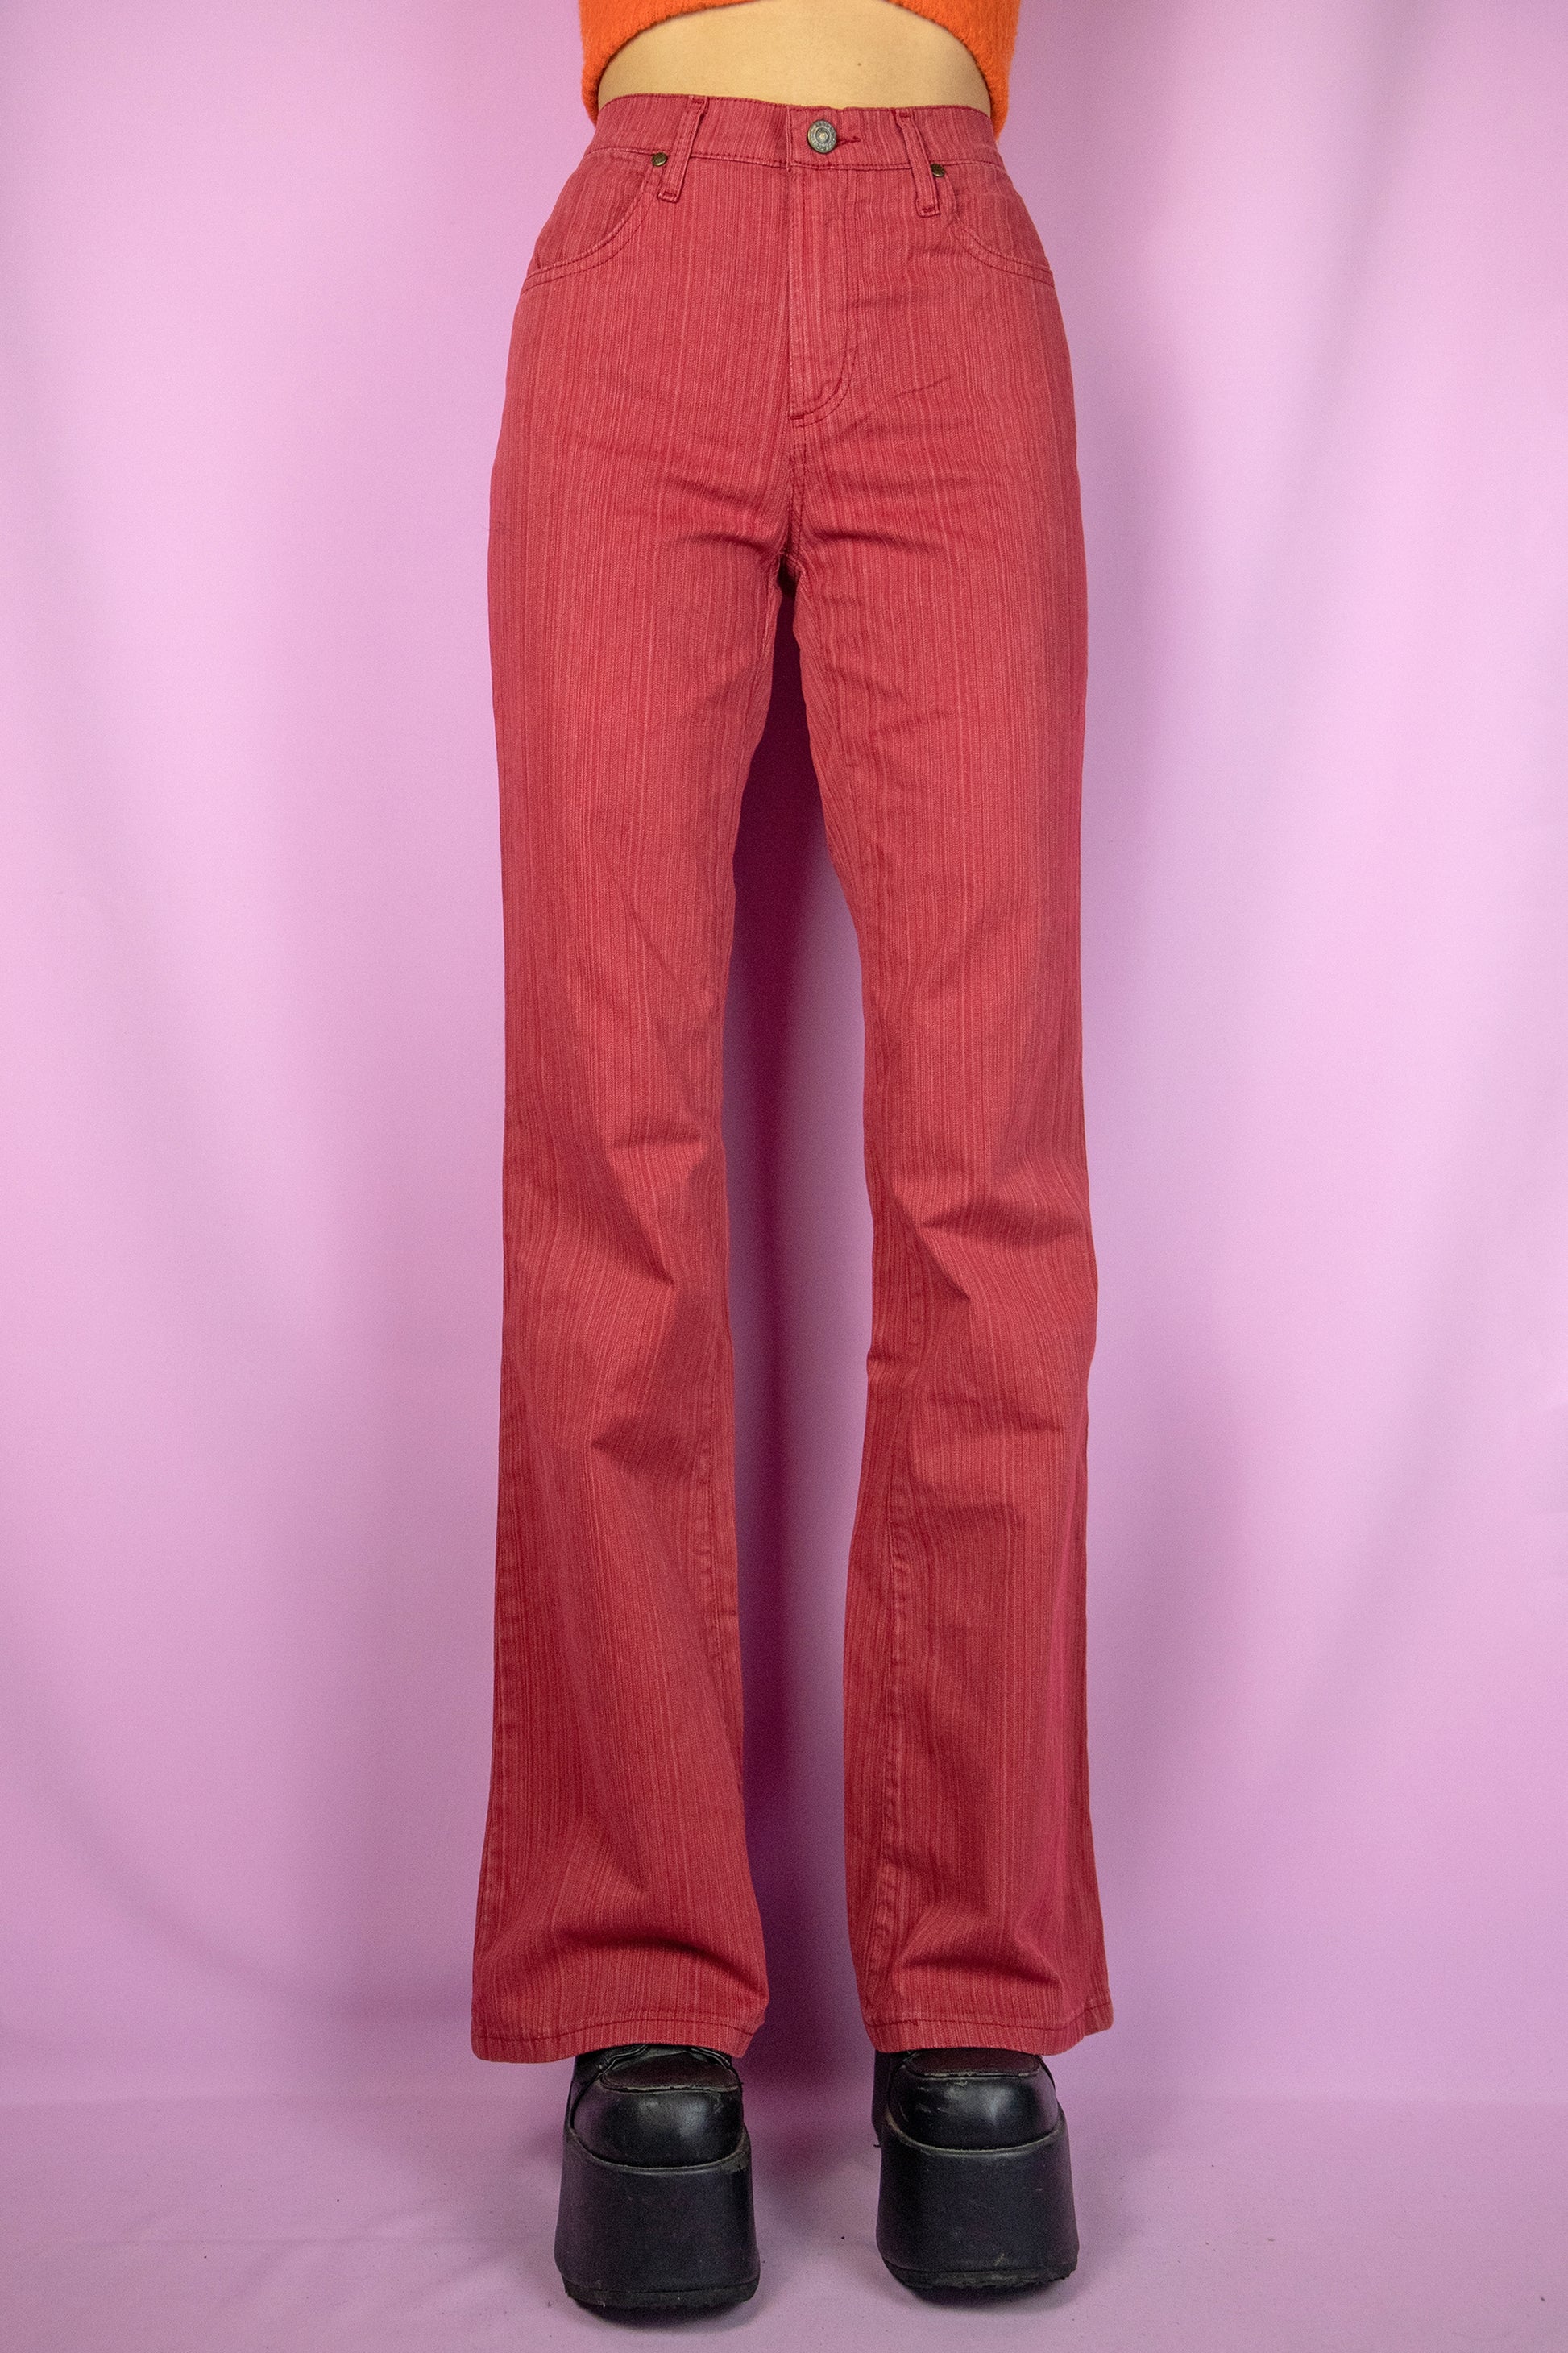 The Y2K Red Flare Jeans are vintage 2000s high-waisted, slightly stretchy pants with pockets and a zipper closure. Made in Spain. Excellent vintage condition.